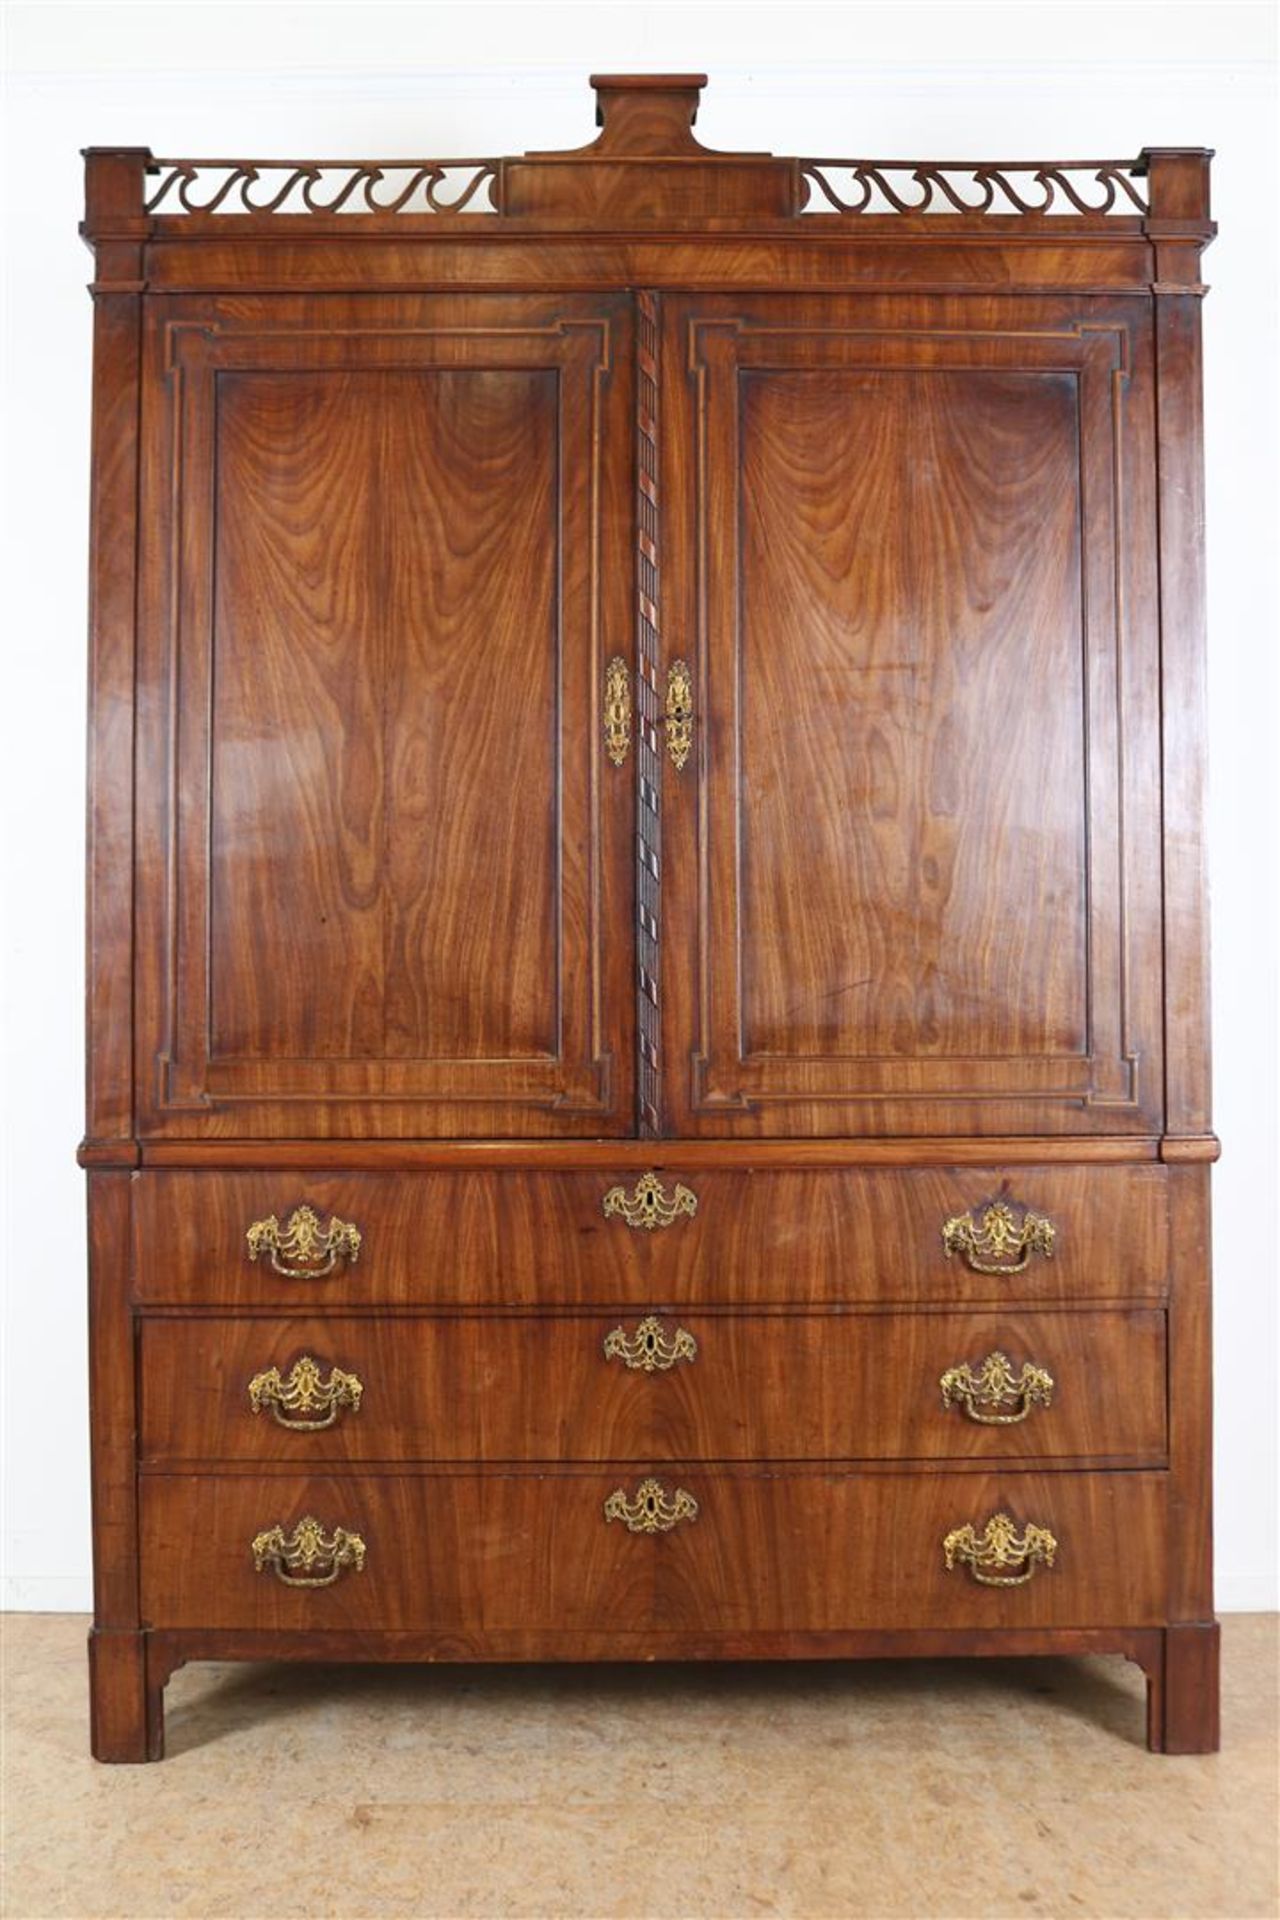 Mahogany veneered gate cabinet, with straight hood with gallery edge decorated with pilasters, 2